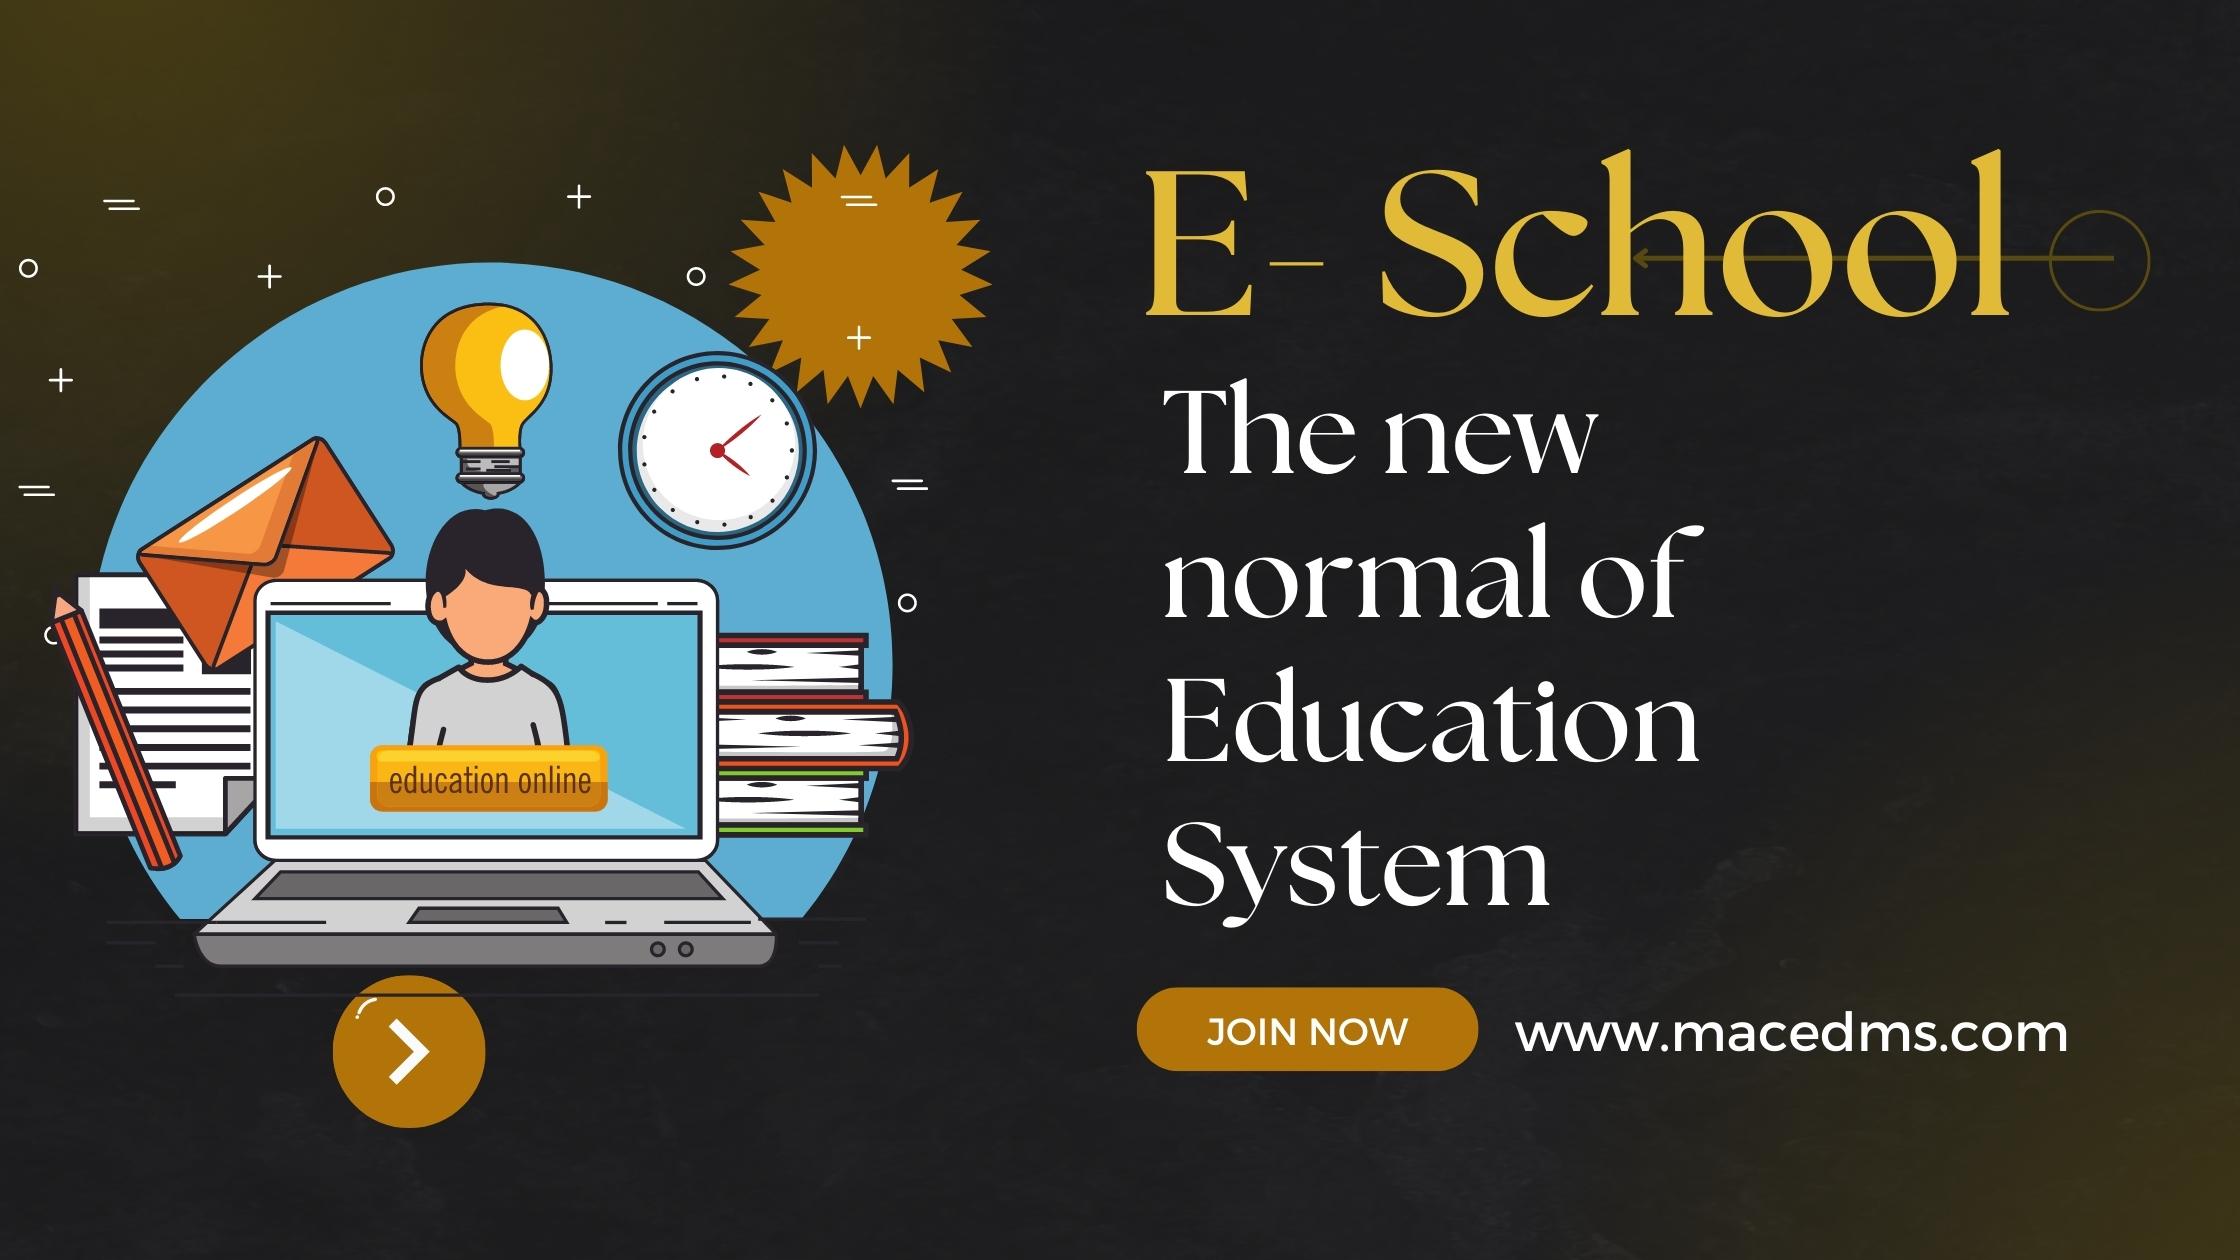 E- School: The new normal of Education System